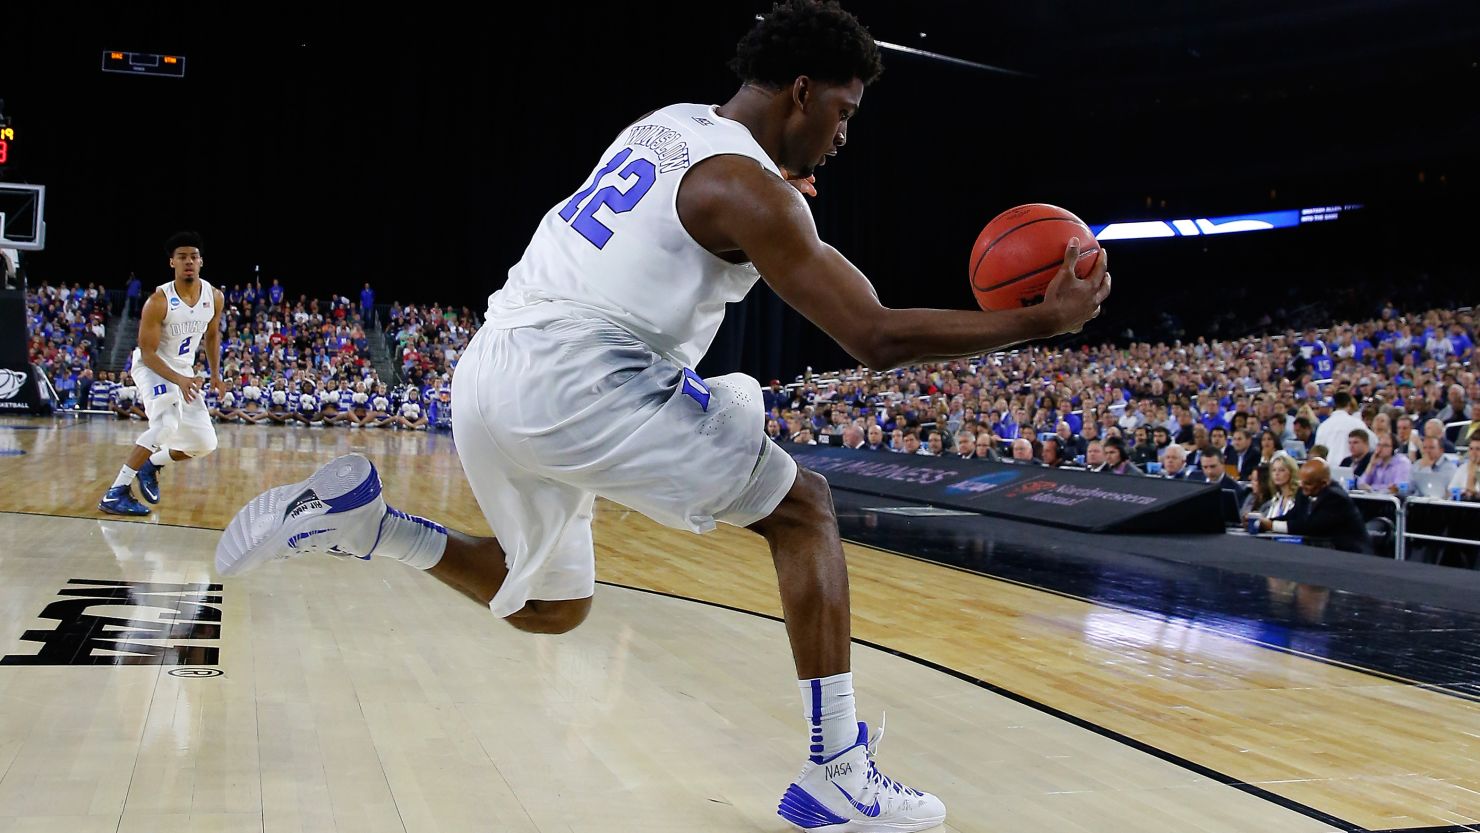 Justise Winslow of the Duke Blue Devils saves the ball from going out of bounds against the Utah Utes during a South Regional Semifinal game on Friday in Houston.